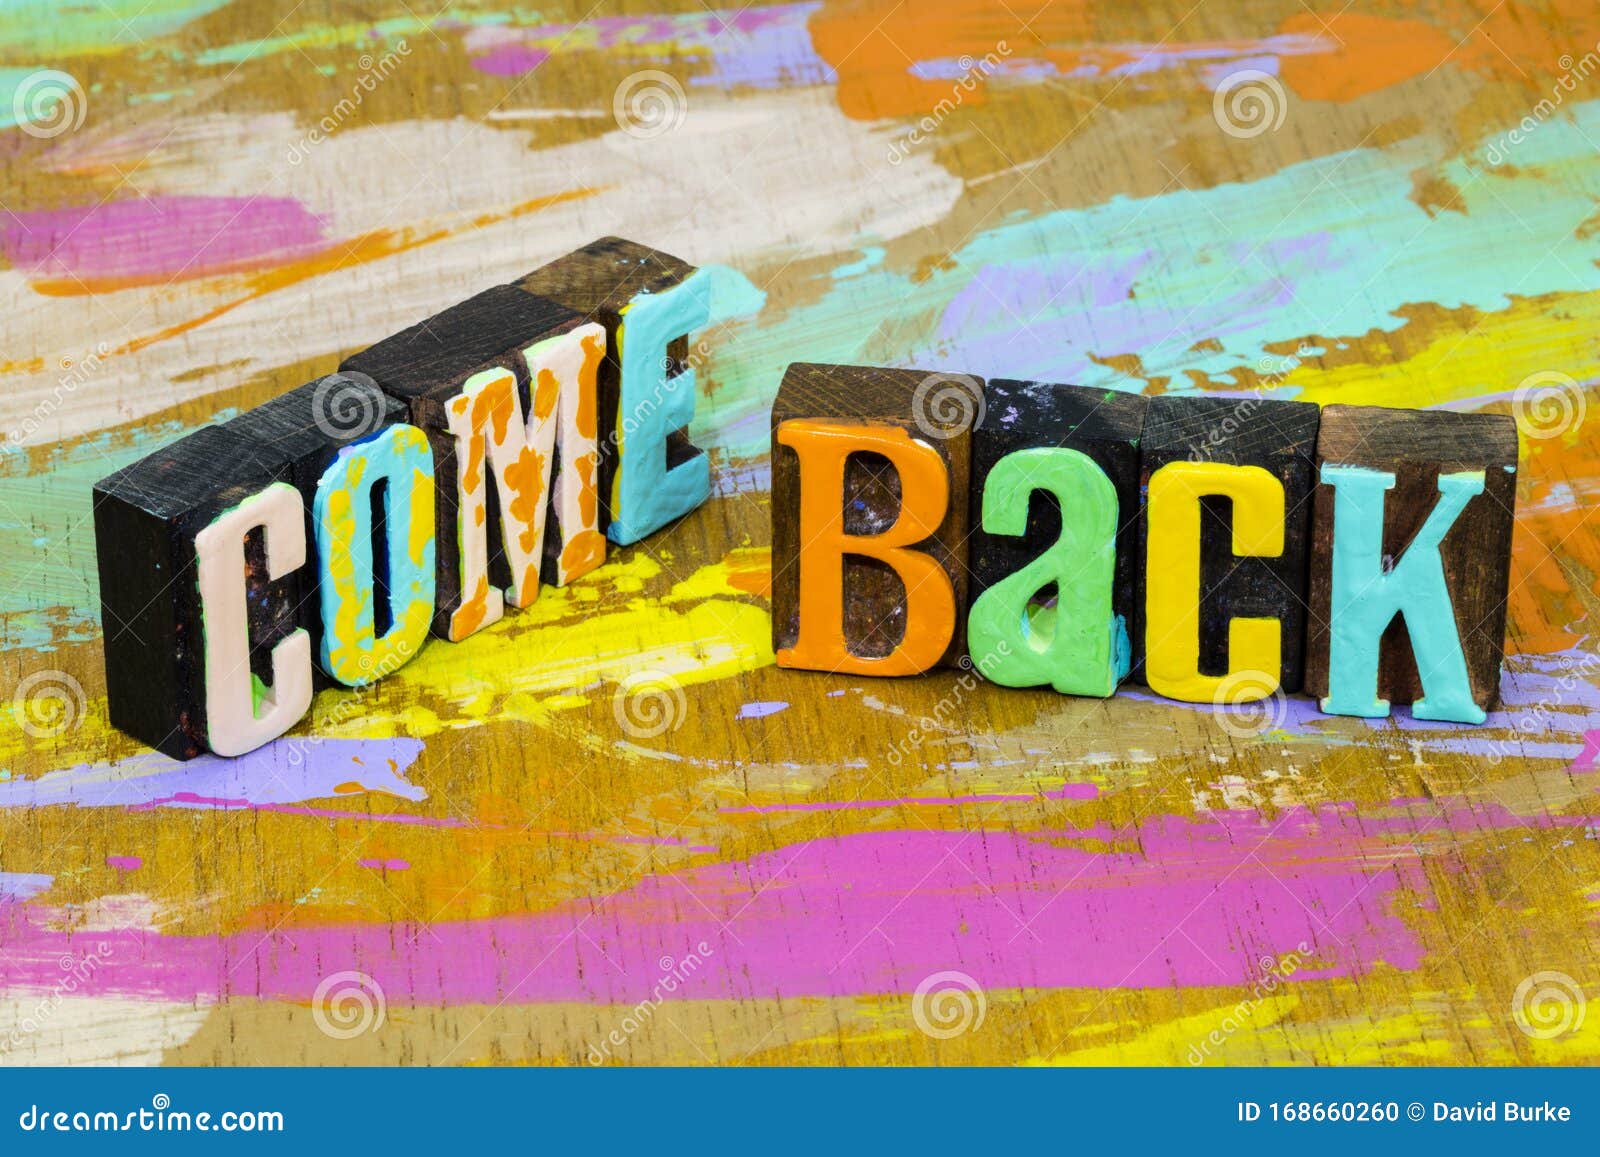 come back welcome home please family return trip